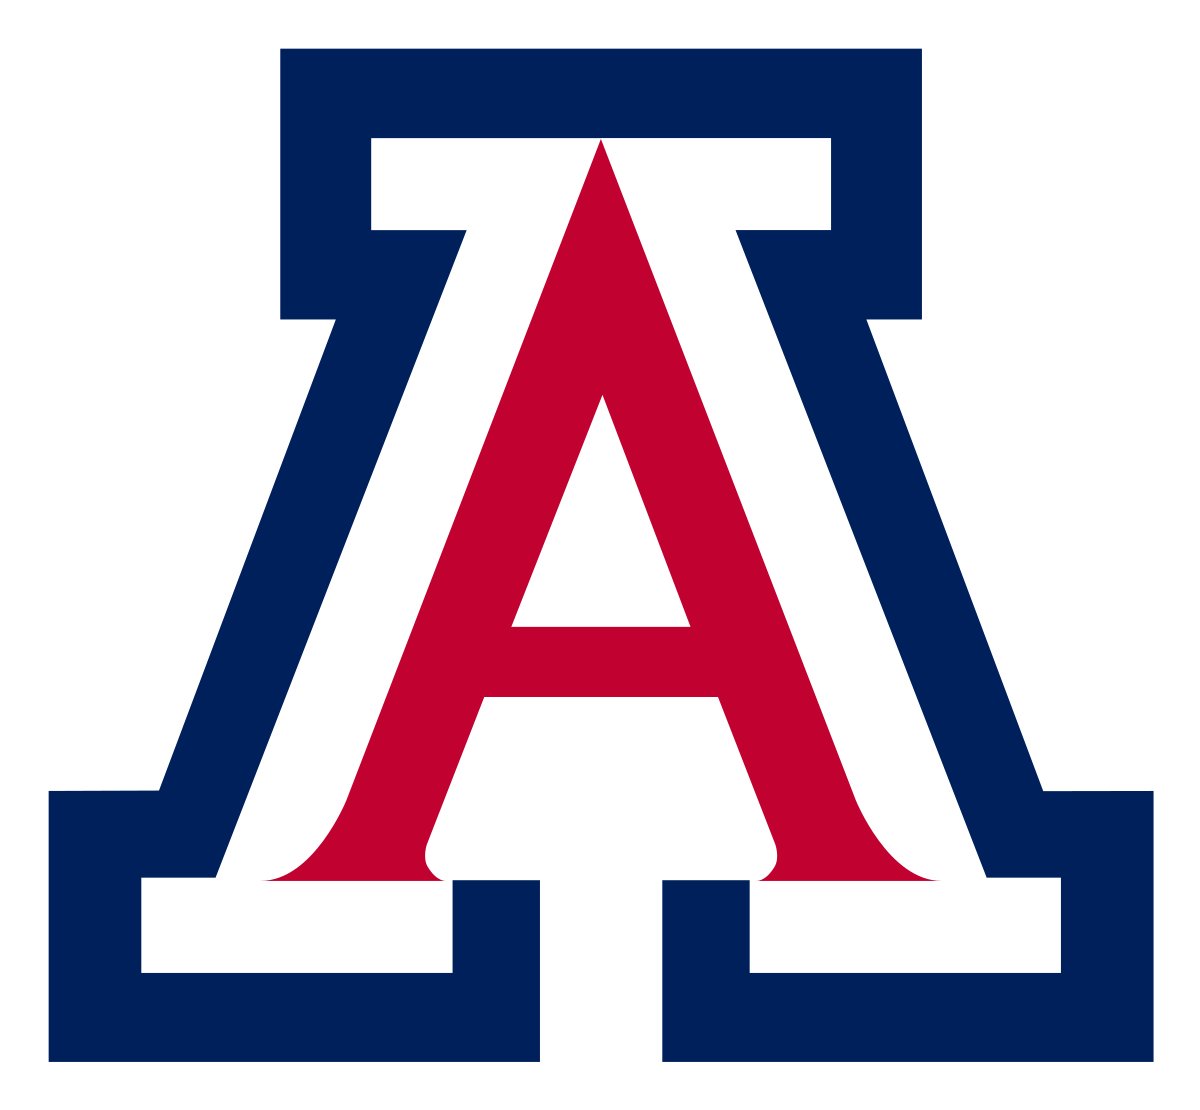 #AGTG After a great conversation with @RealCoachCarter, I am blessed to receive an offer from the University of Arizona @ArizonaFBall @Fletcher_UofA @CoachWCompton @HuttoHS_Fball @On3Recruits @247Sports @Rivals @SkysTheLimitWR @Storm24Tx